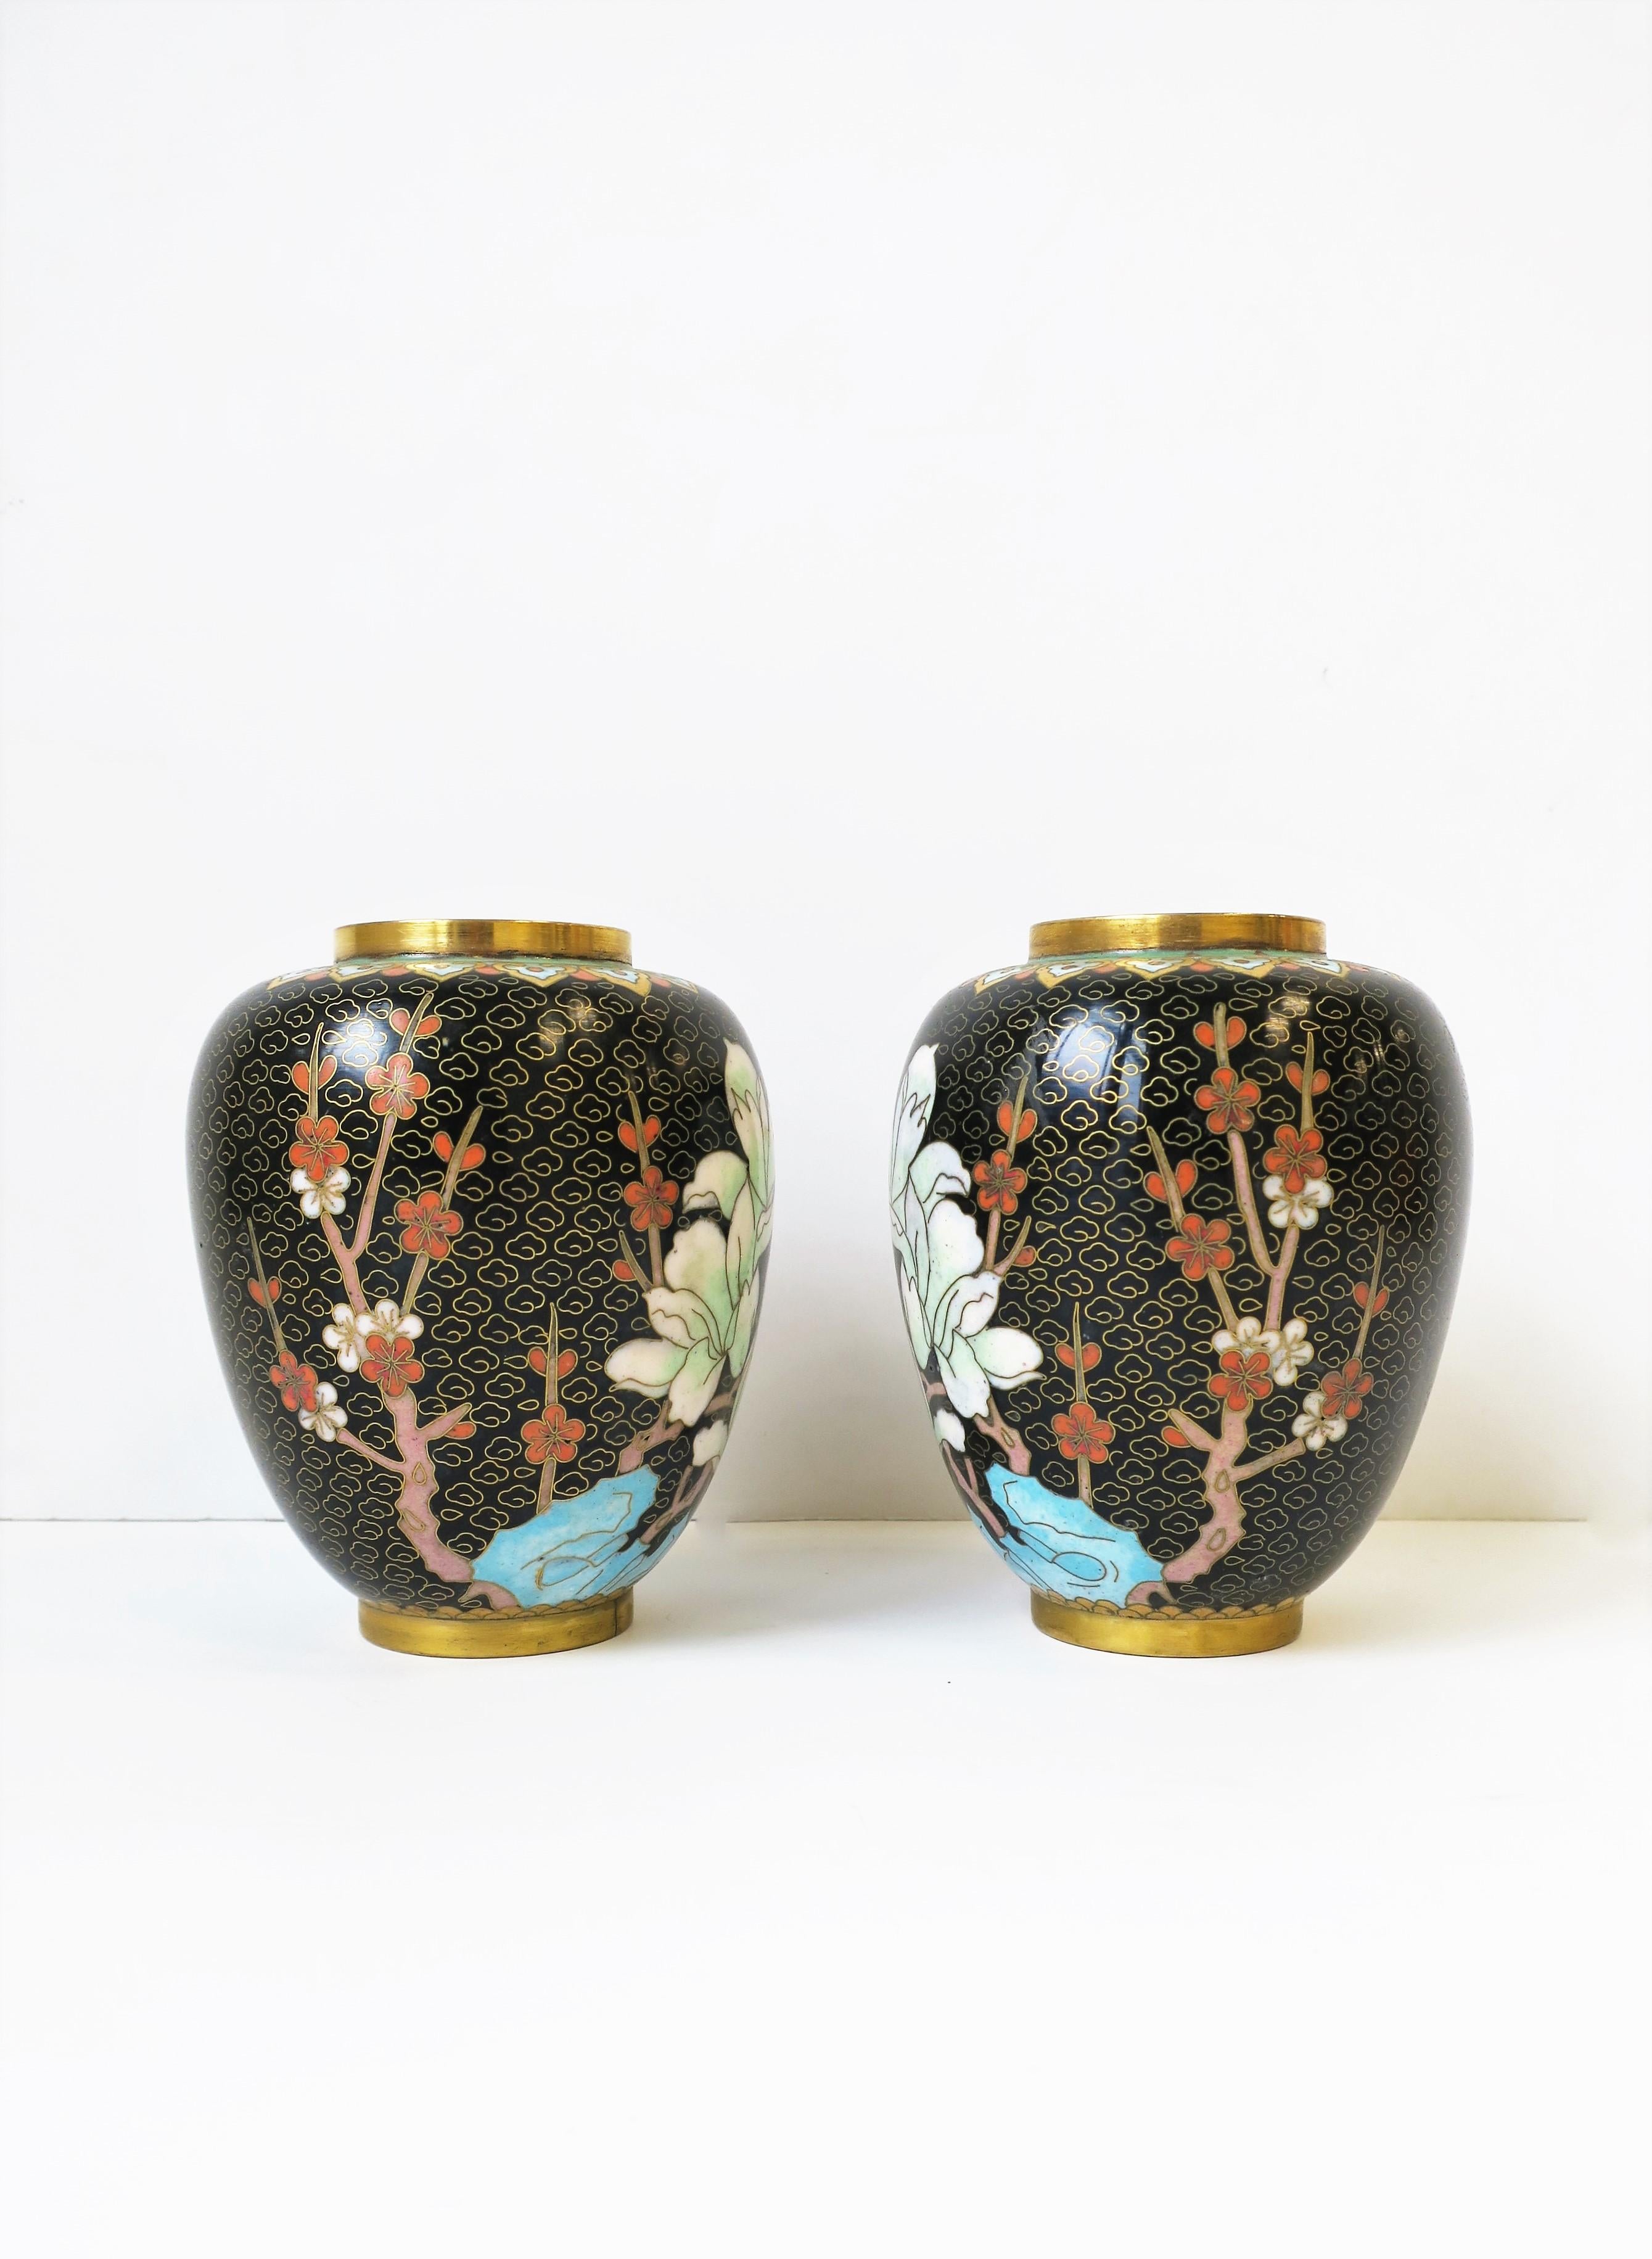 Cloisonné́ Enamel and Brass Flower Vases Black Gold and Pastel Colors, Pair In Good Condition For Sale In New York, NY